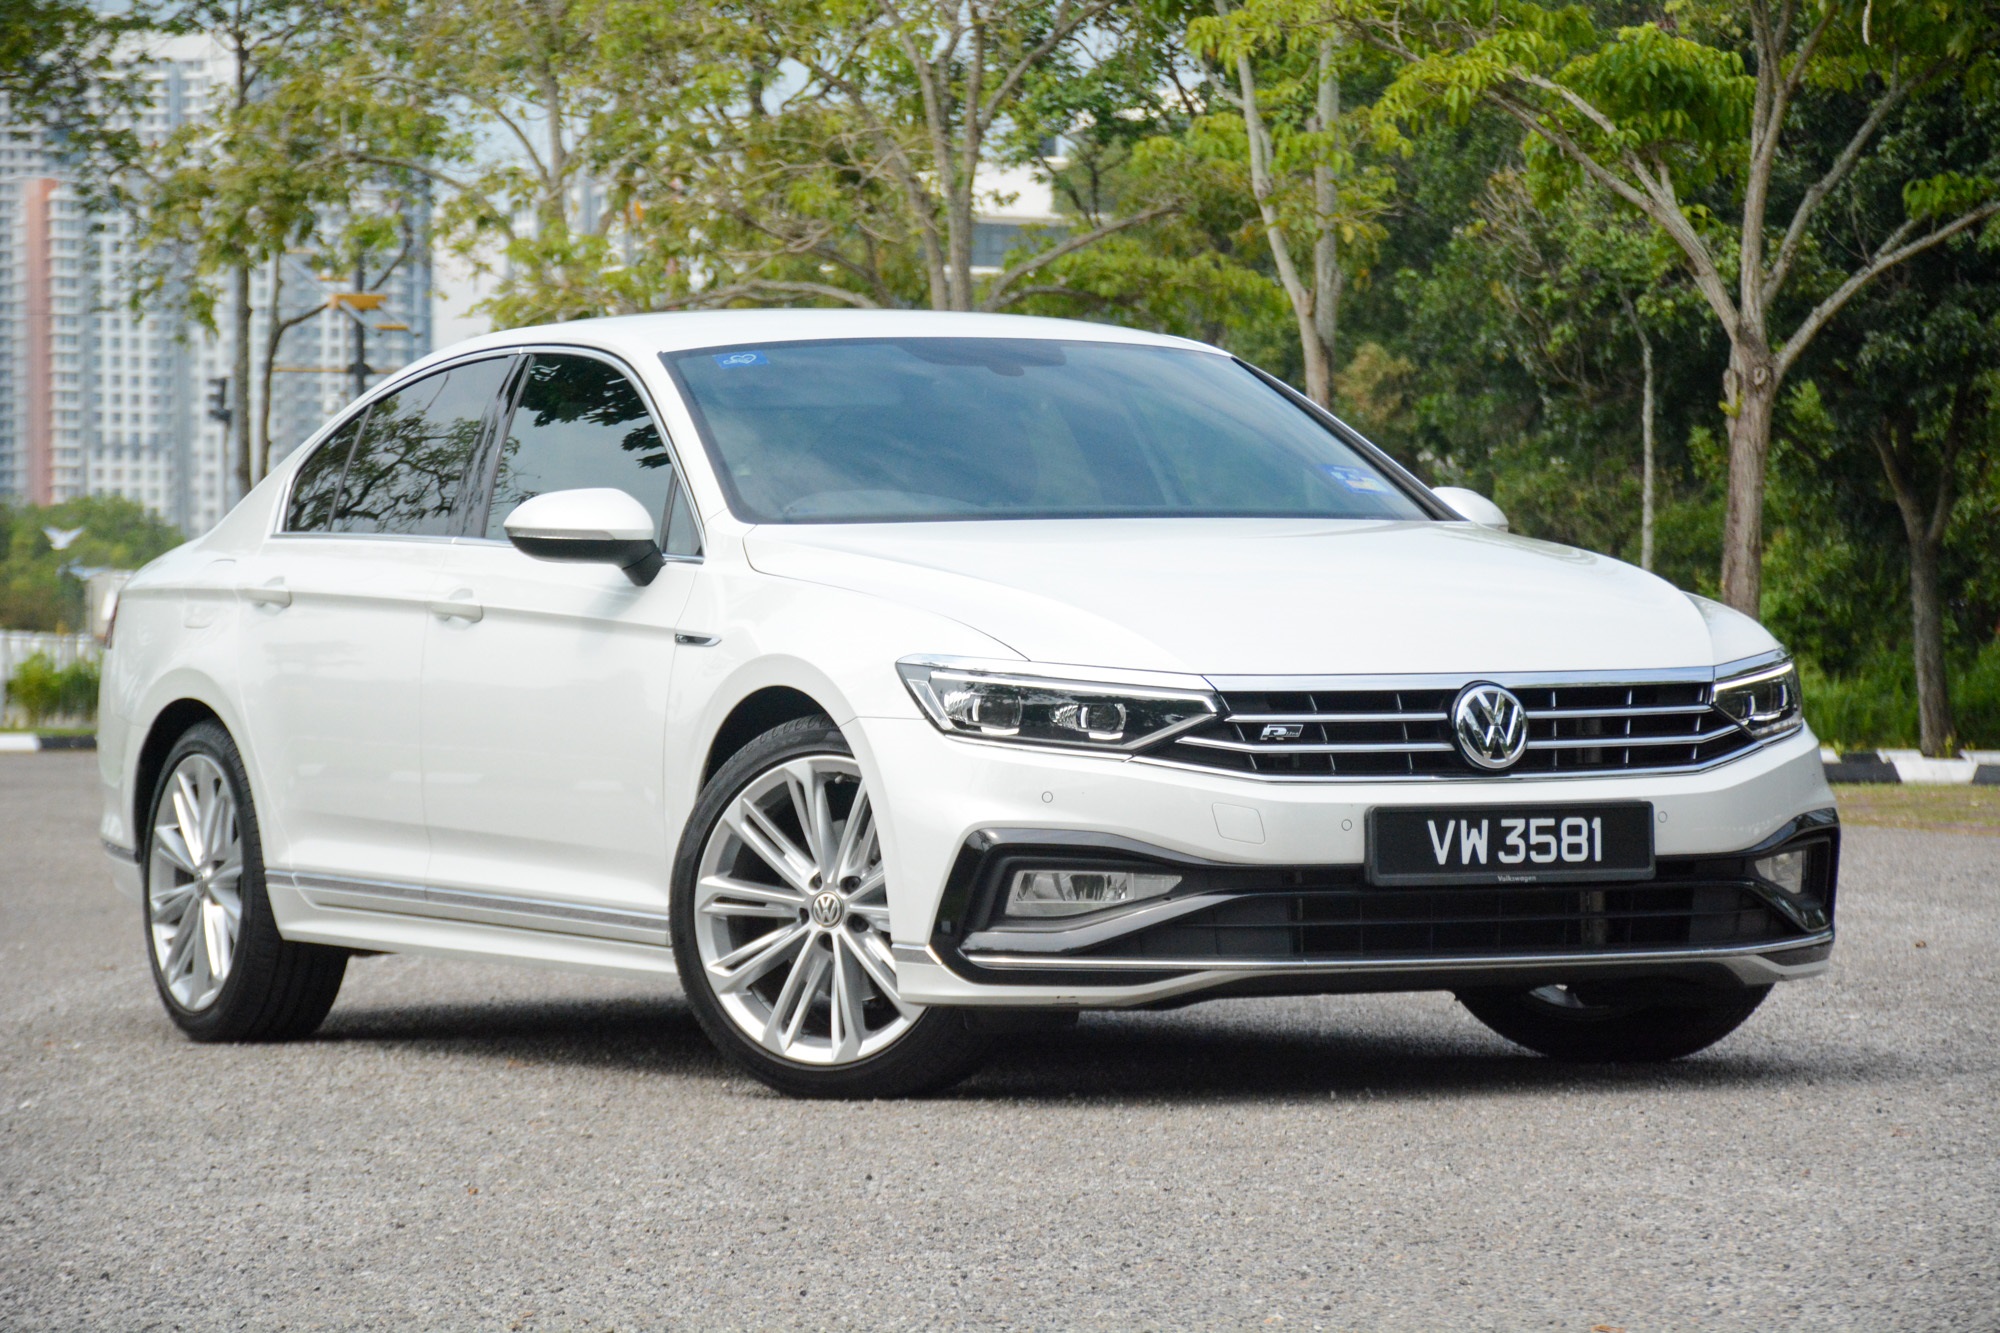 topgear-no-stock-shortage-for-vw-rebates-up-to-rm10k-offered-on-new